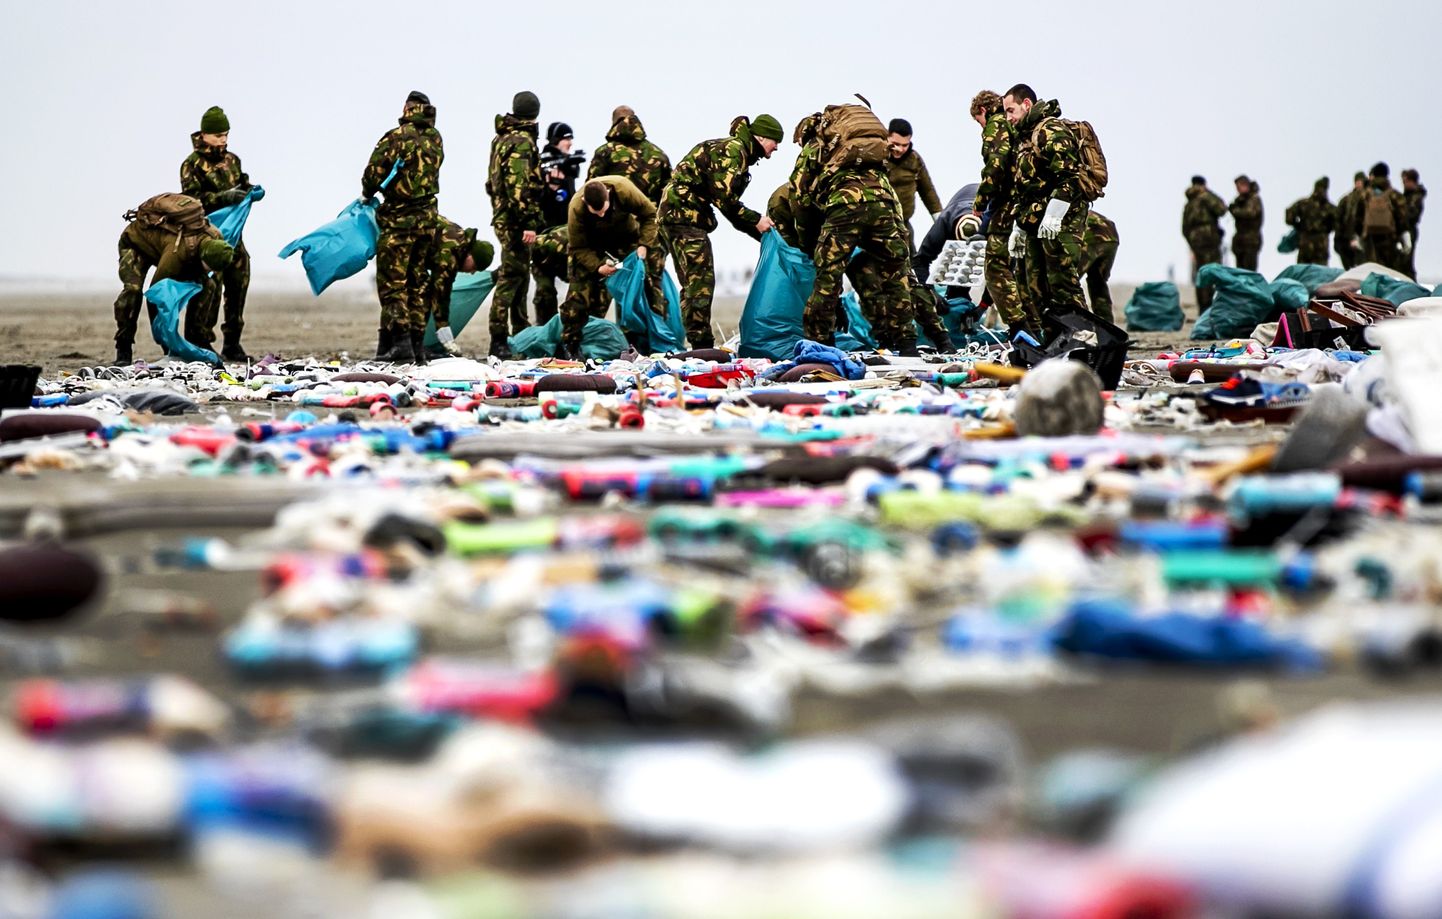 TOPSHOT - Netherlands' army soldiers take part in the cleaning of the coastline of Schiermonnikoog on January 4, 2019 in the Dutch Frisian Island, two days after some 270 containers tumbled from the Panama-registered MSC Zoe, one of the world's biggest cargo ships in rough weather. - The MSC Zoe, which was mostly carrying toys, furniture and auto parts, lost the containers late on Tuesday while battling a storm off the Frisian Islands, an archipelago off the northwestern Dutch coast also known as the Wadden Islands. (Photo by Remko de Waal / ANP / AFP) / Netherlands OUT